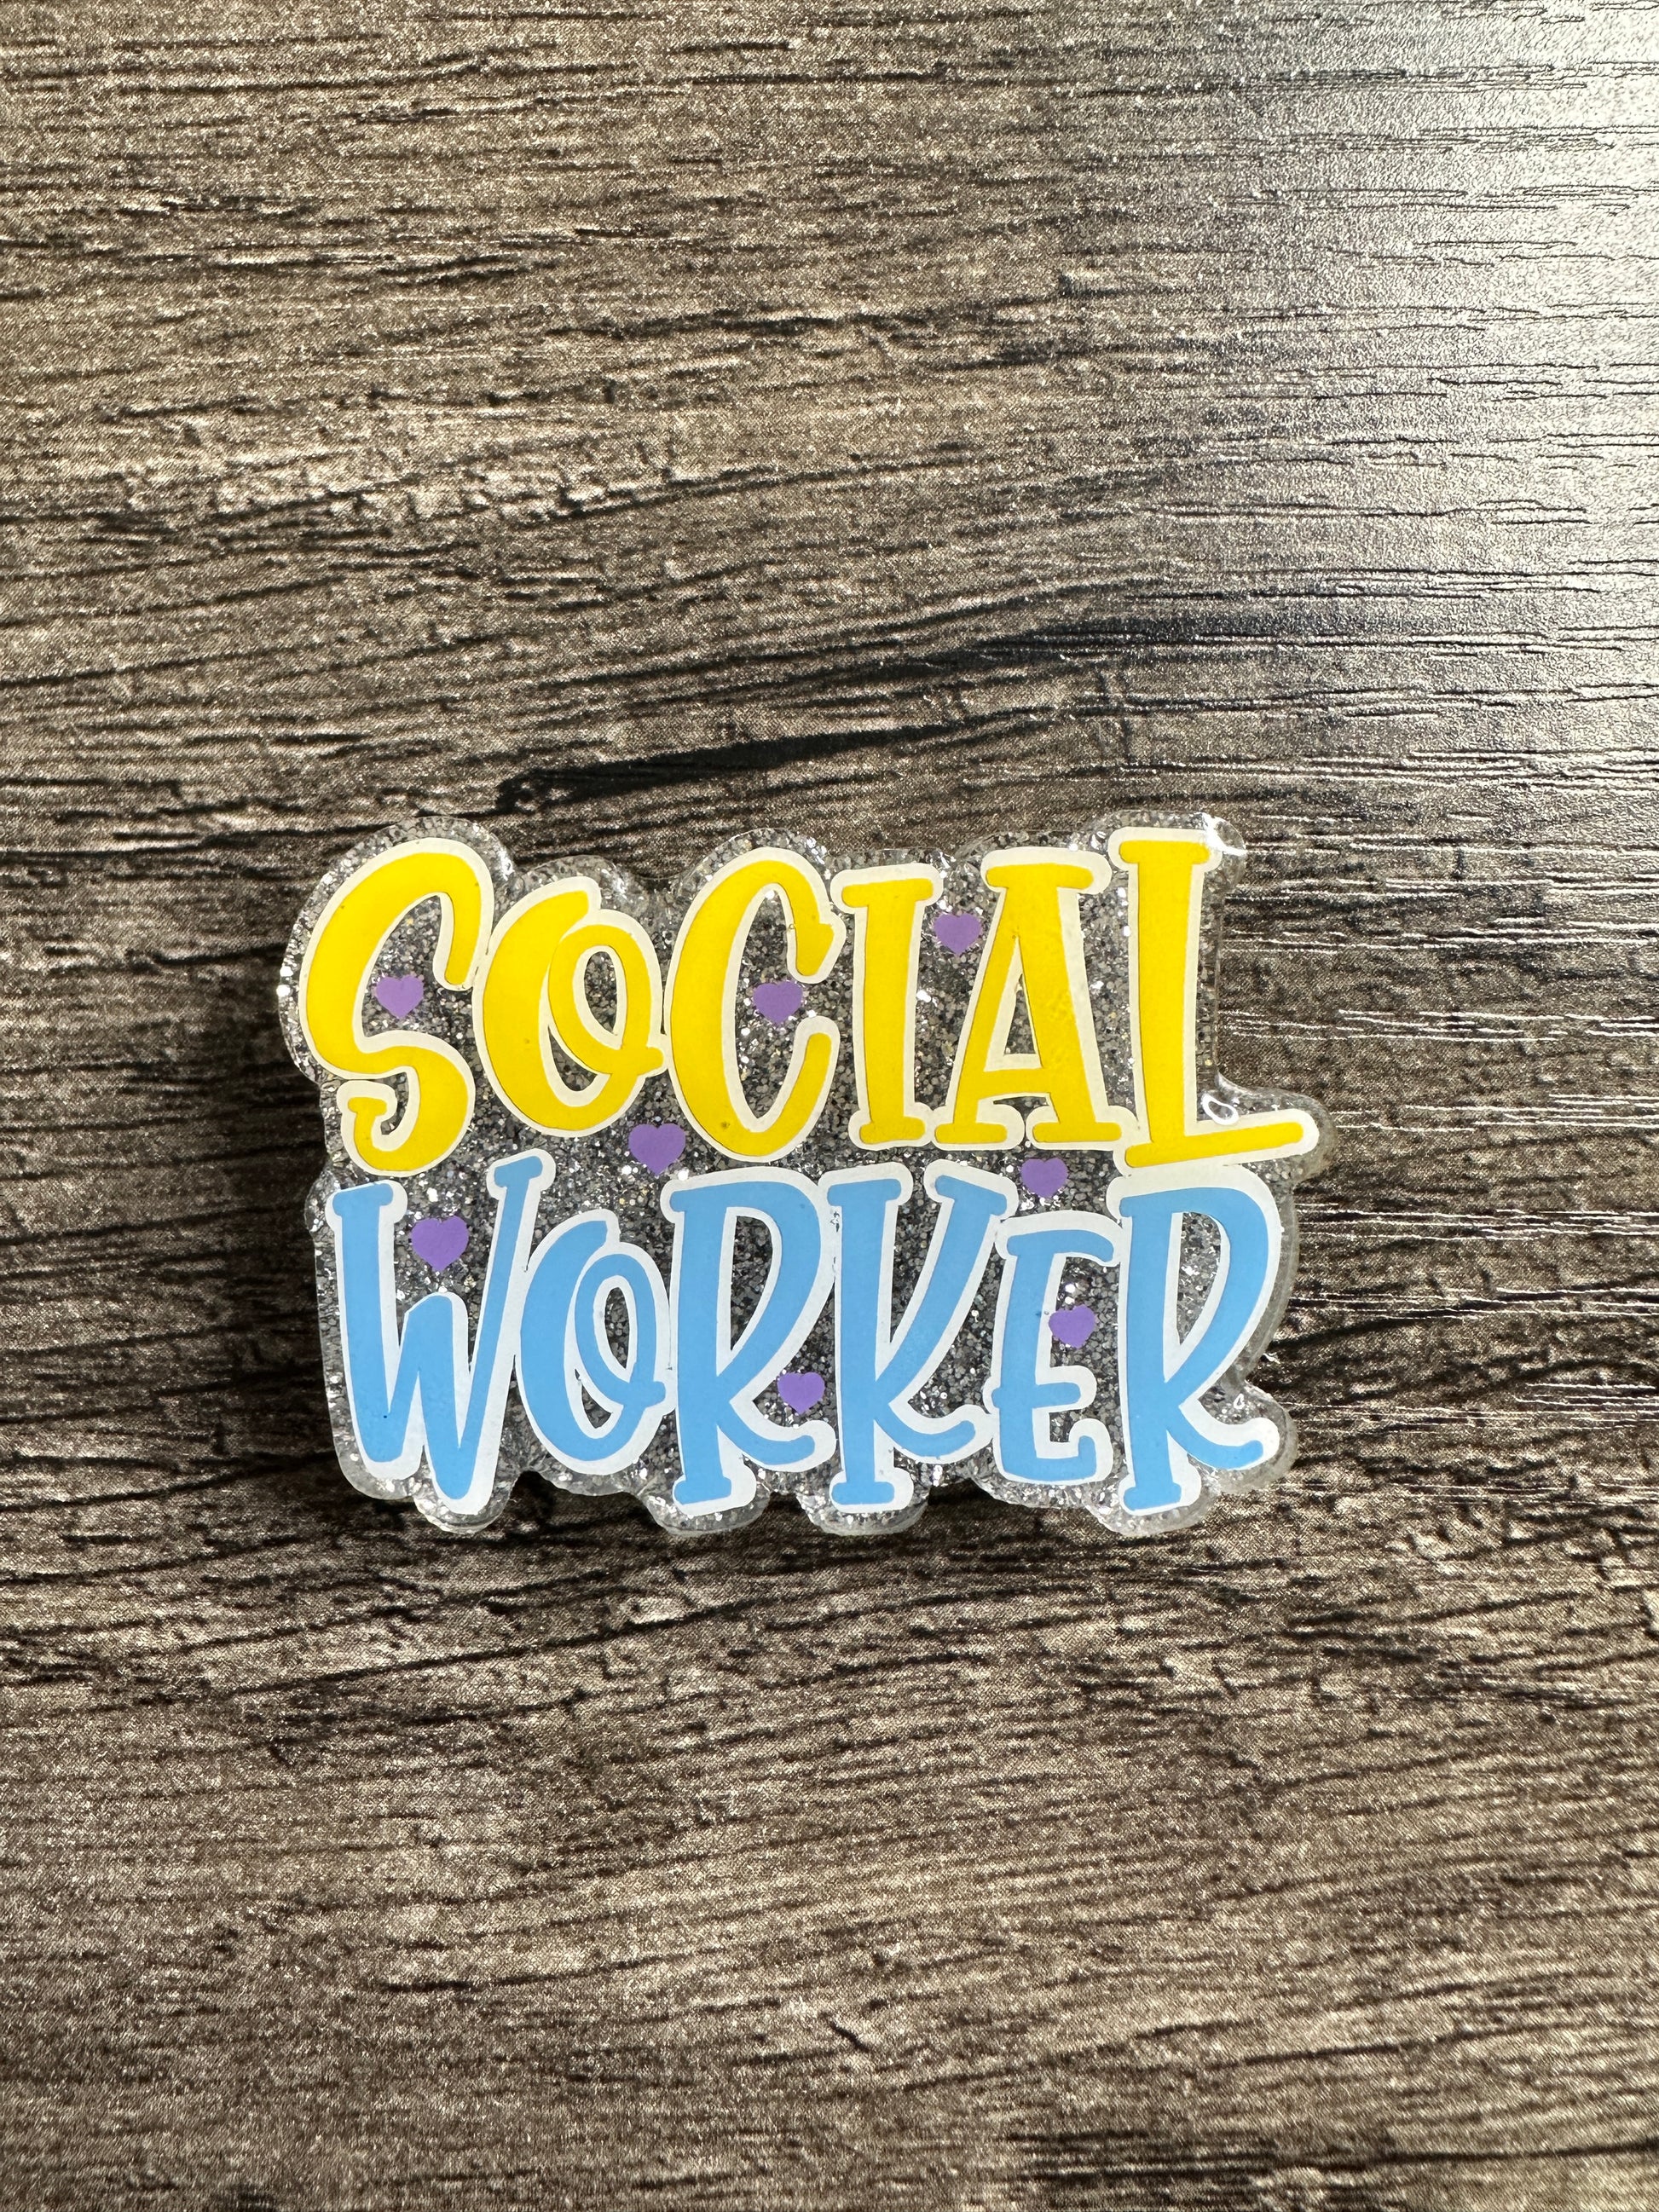 Lmsw (Licensed Master Social Worker) Badge Reel, Social Worker, Mental Health, Social Welfare, Badge Holder, Credentials, Family Support